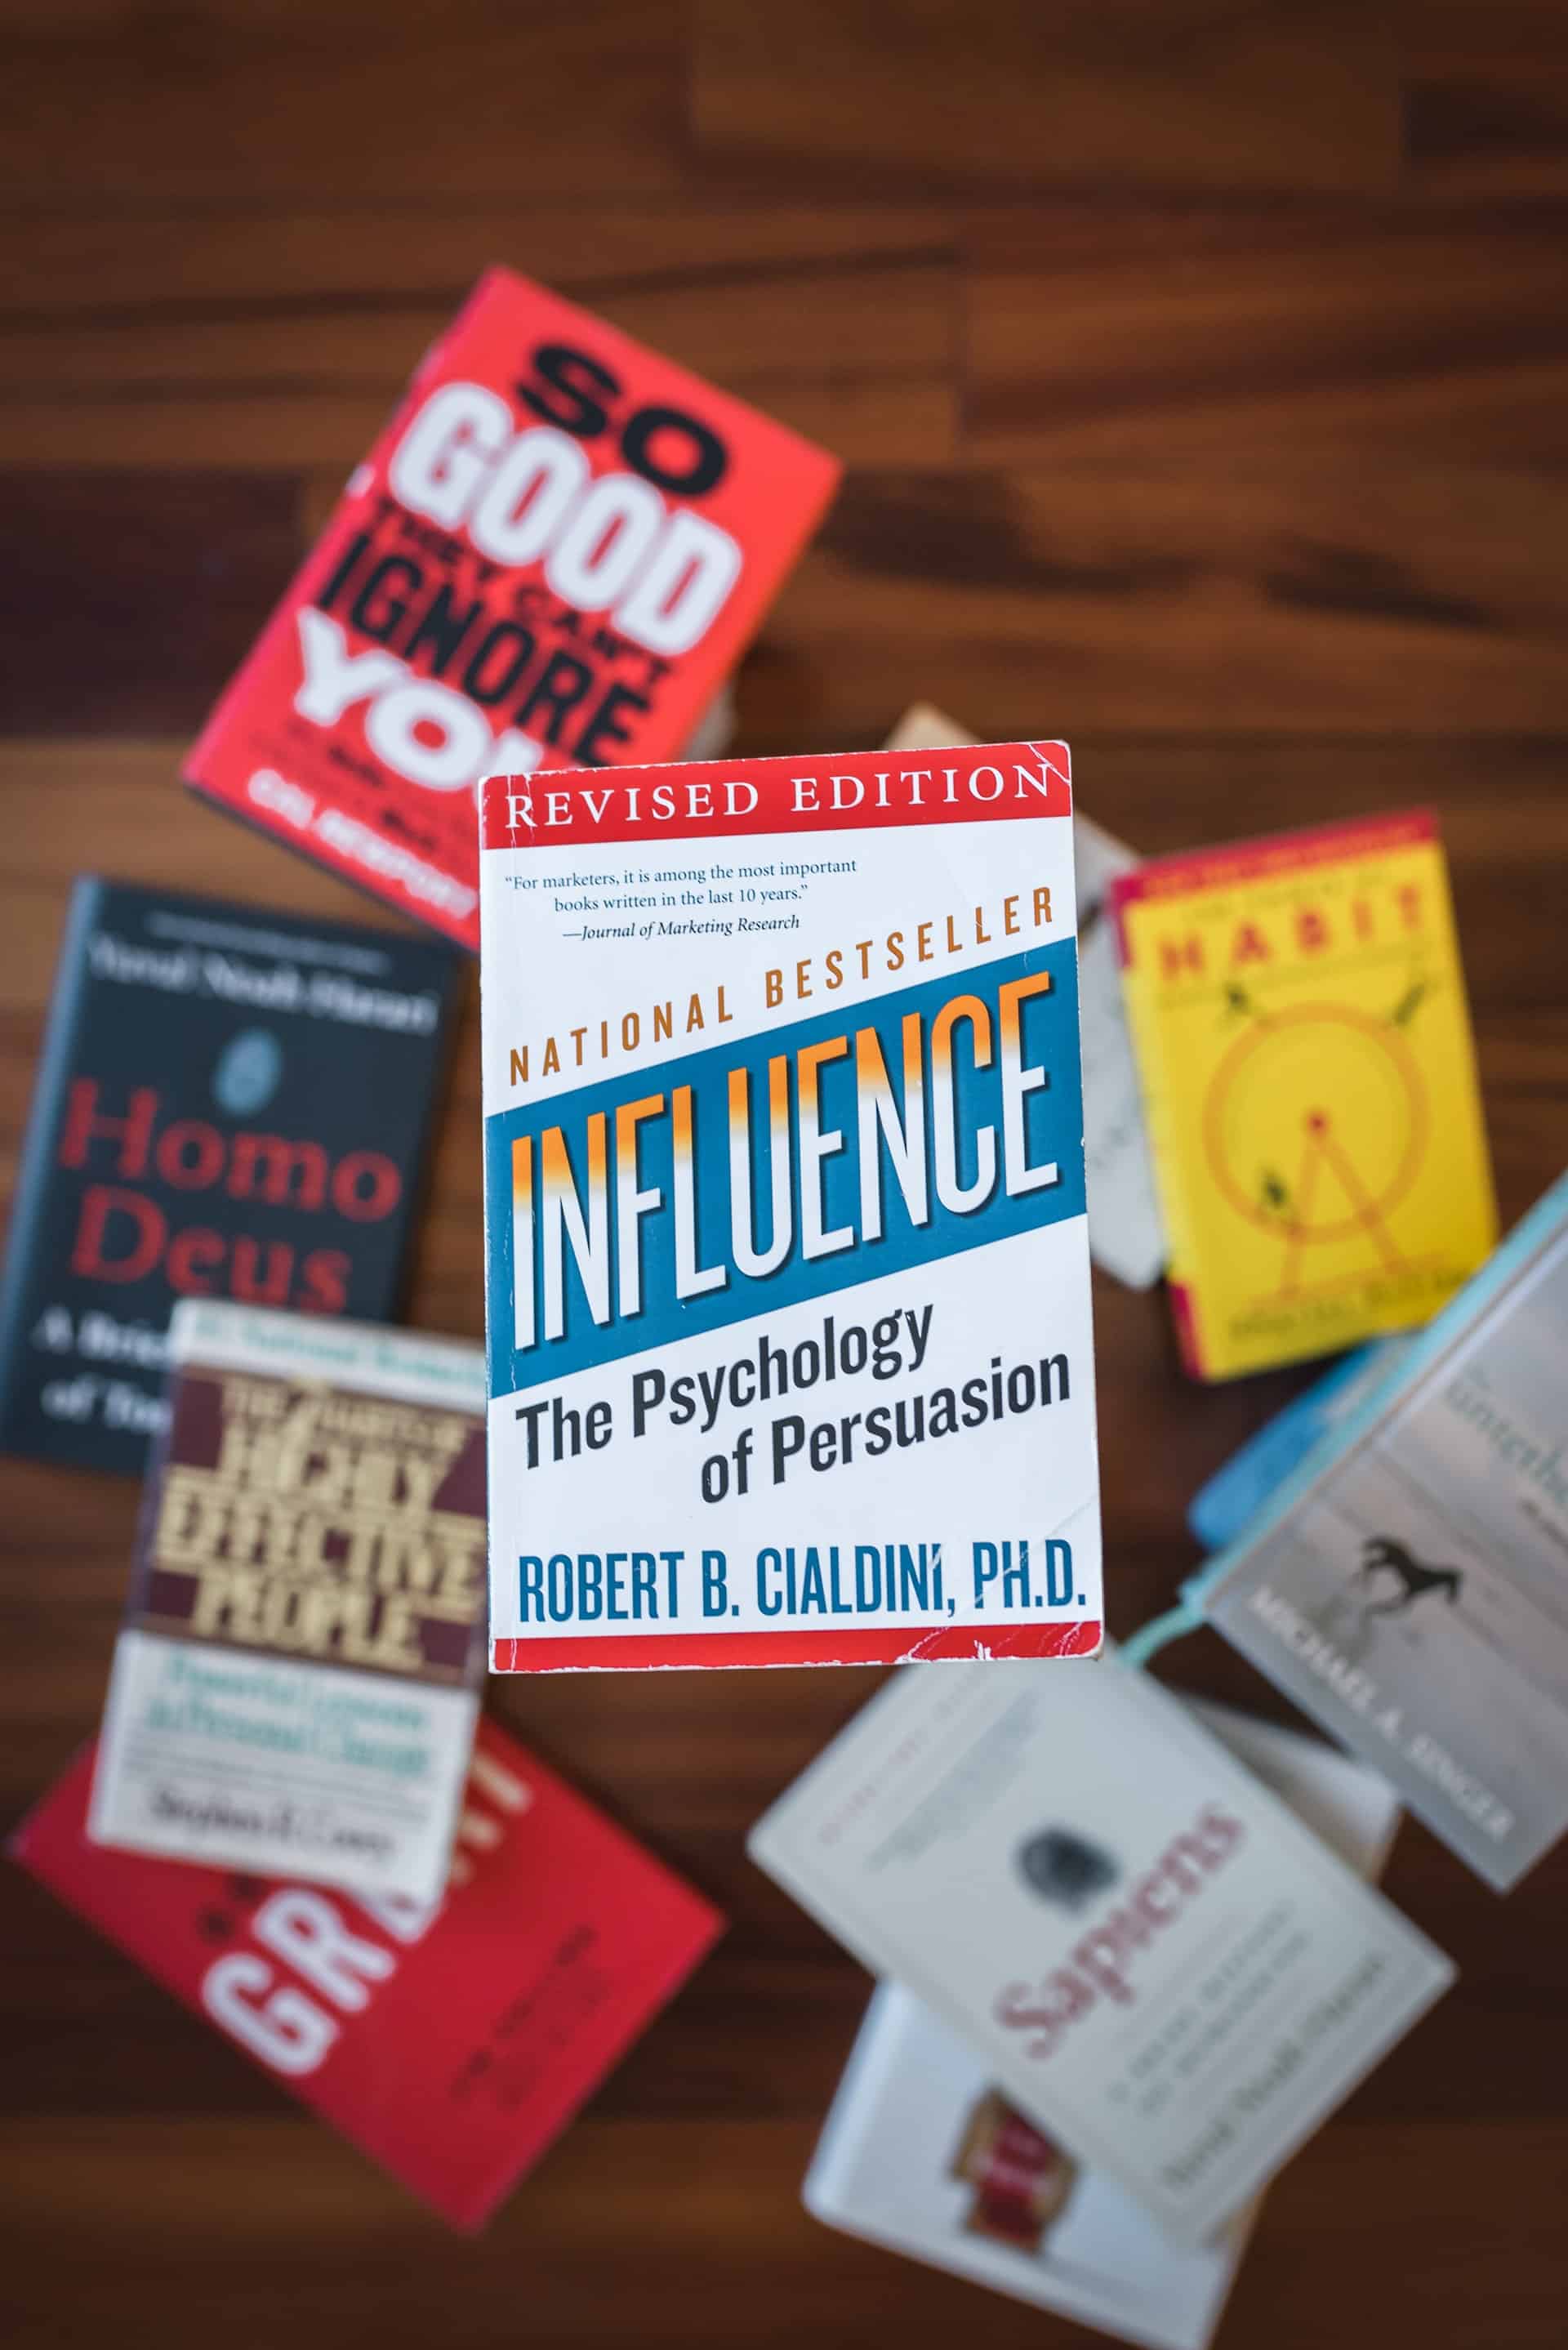 Summary of Influence: The Psychology of Persuasion by Robert B Cialdini